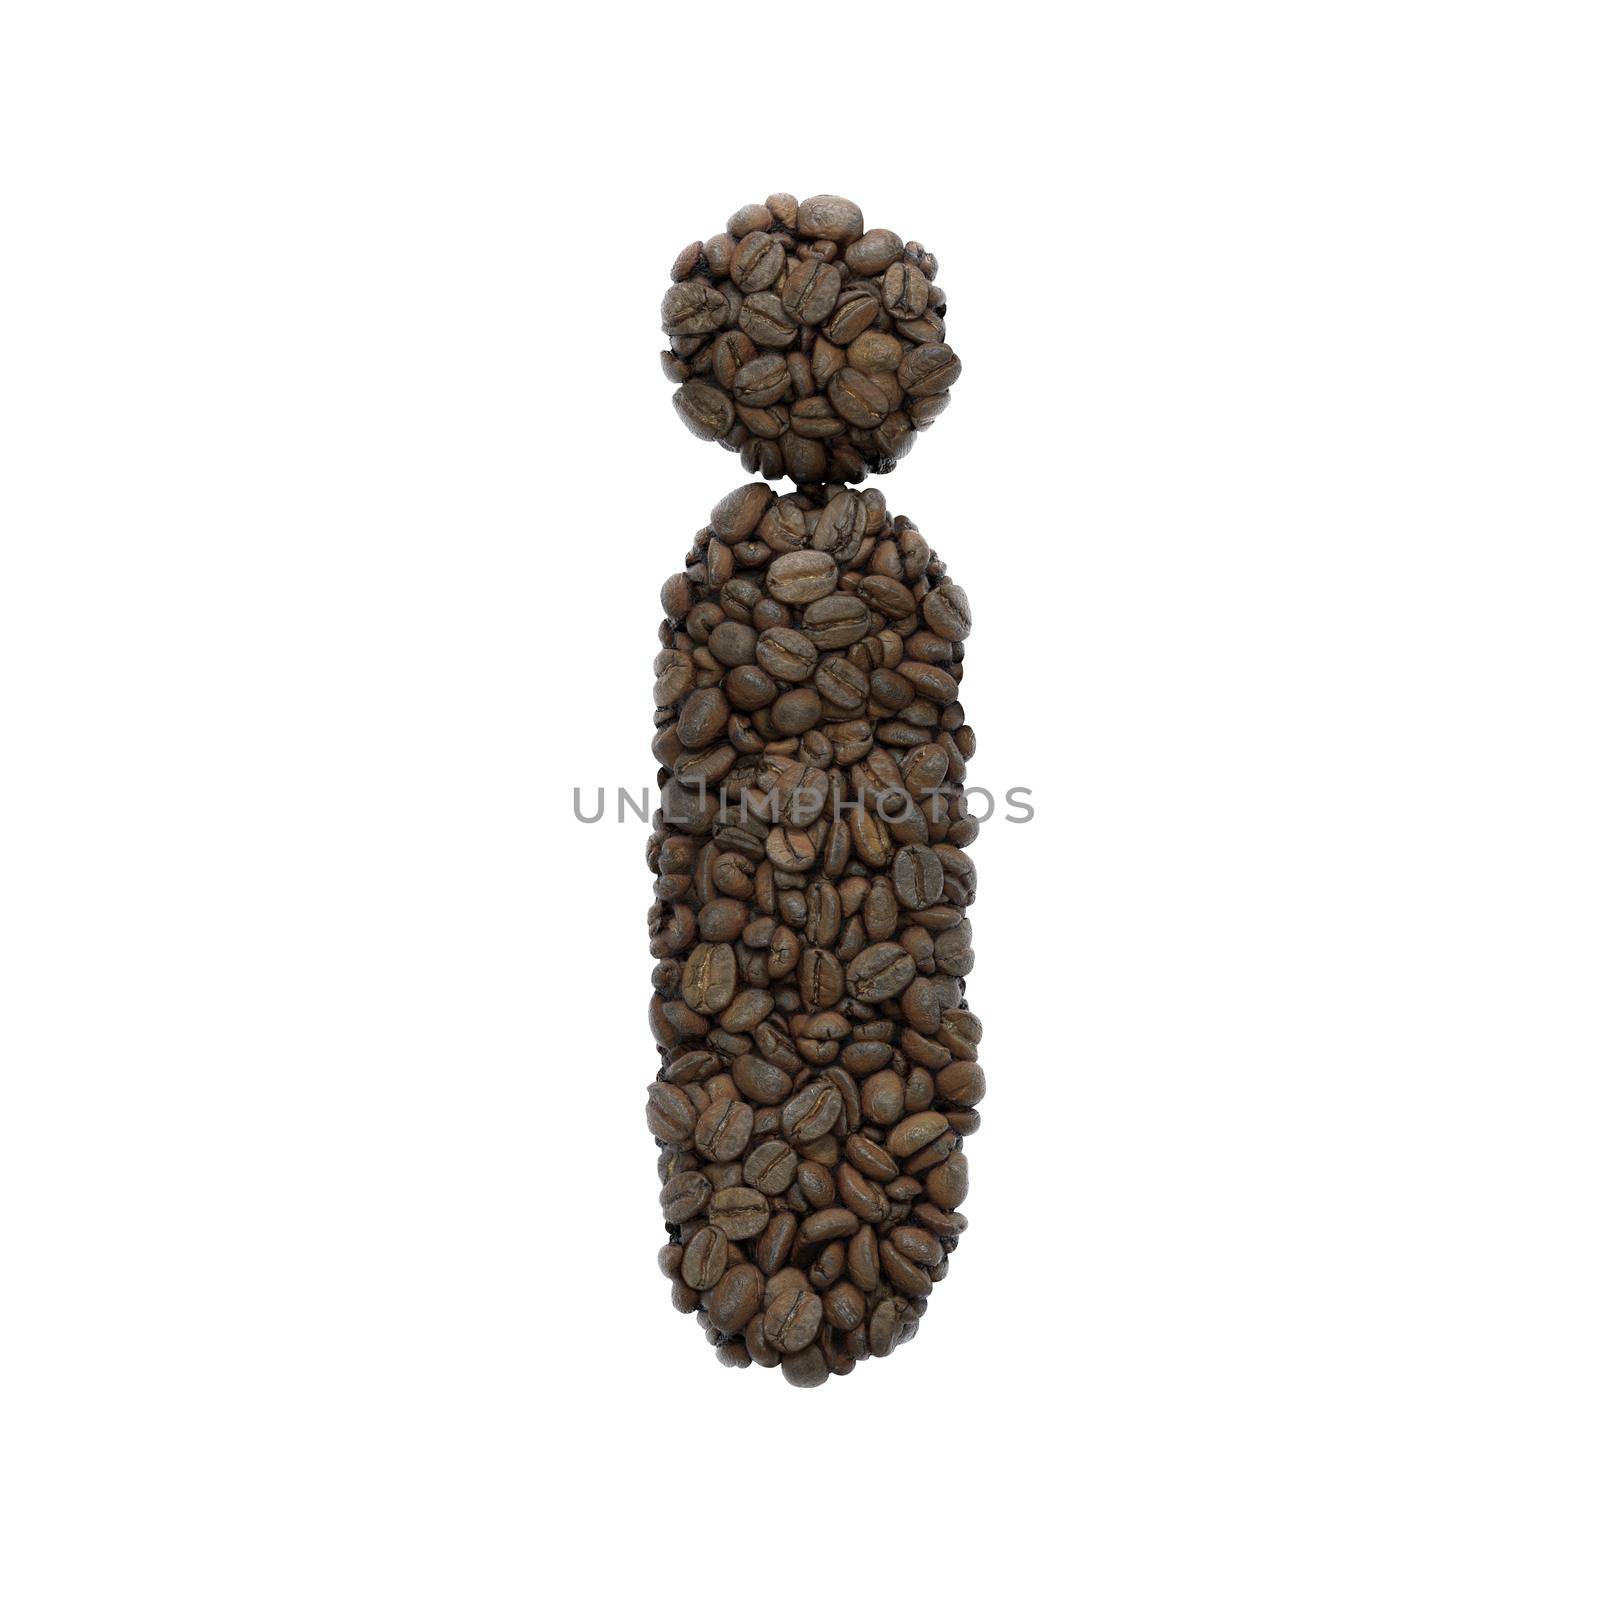 Coffee letter I - Lowercase 3d roasted beans font isolated on white background. This alphabet is perfect for creative illustrations related but not limited to Coffee, energy, insomnia...